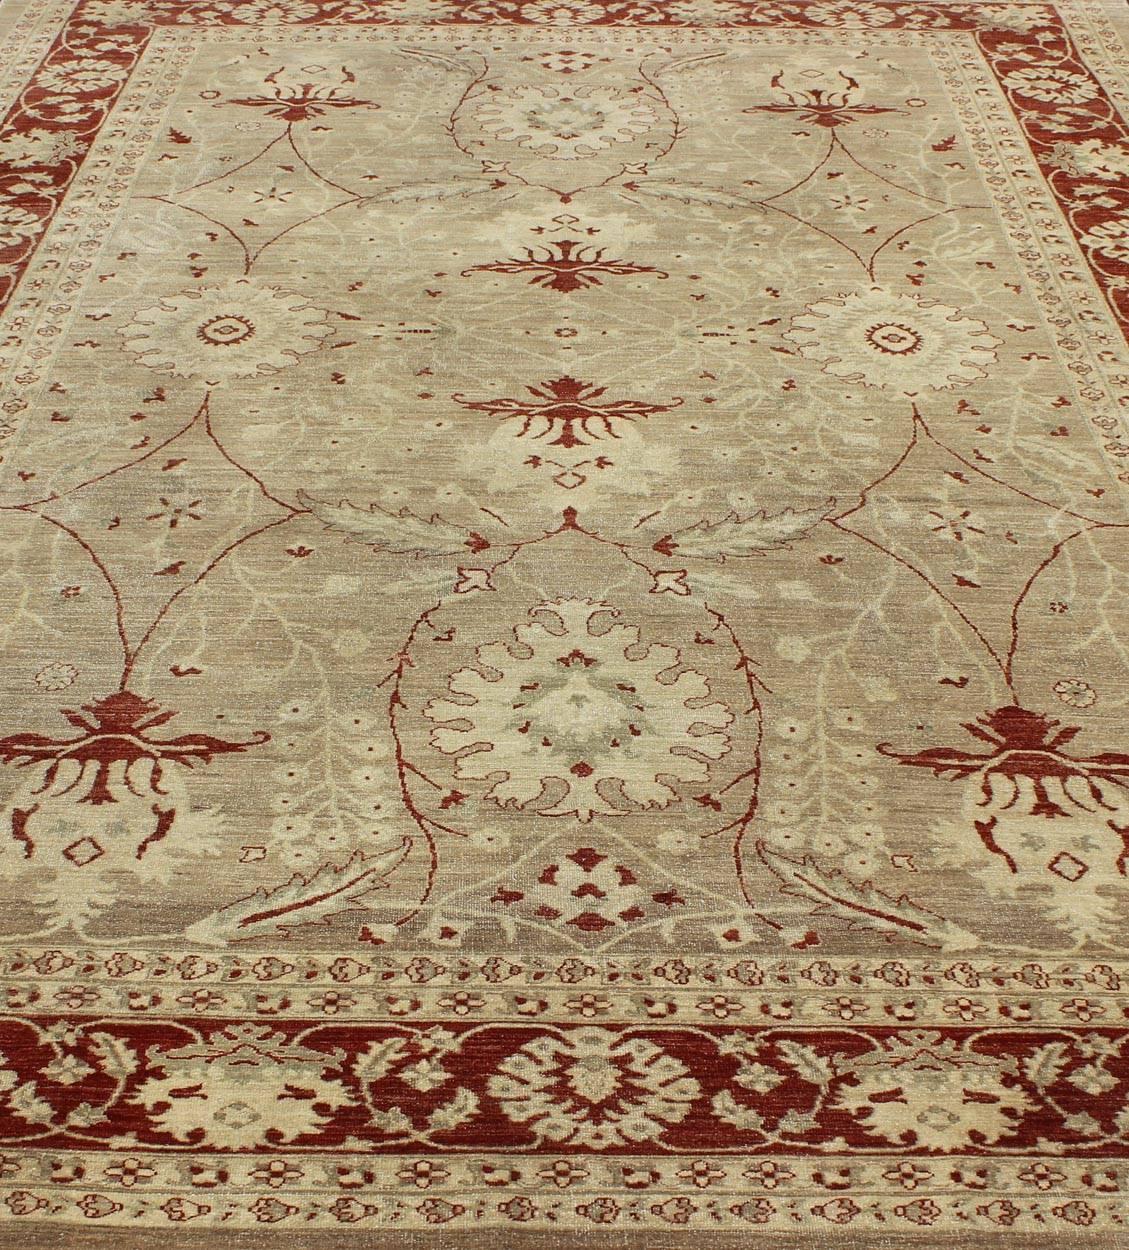 Sultanabad Design Rug with Stylized Design in Light Camel, Cream & Garnet Red For Sale 4